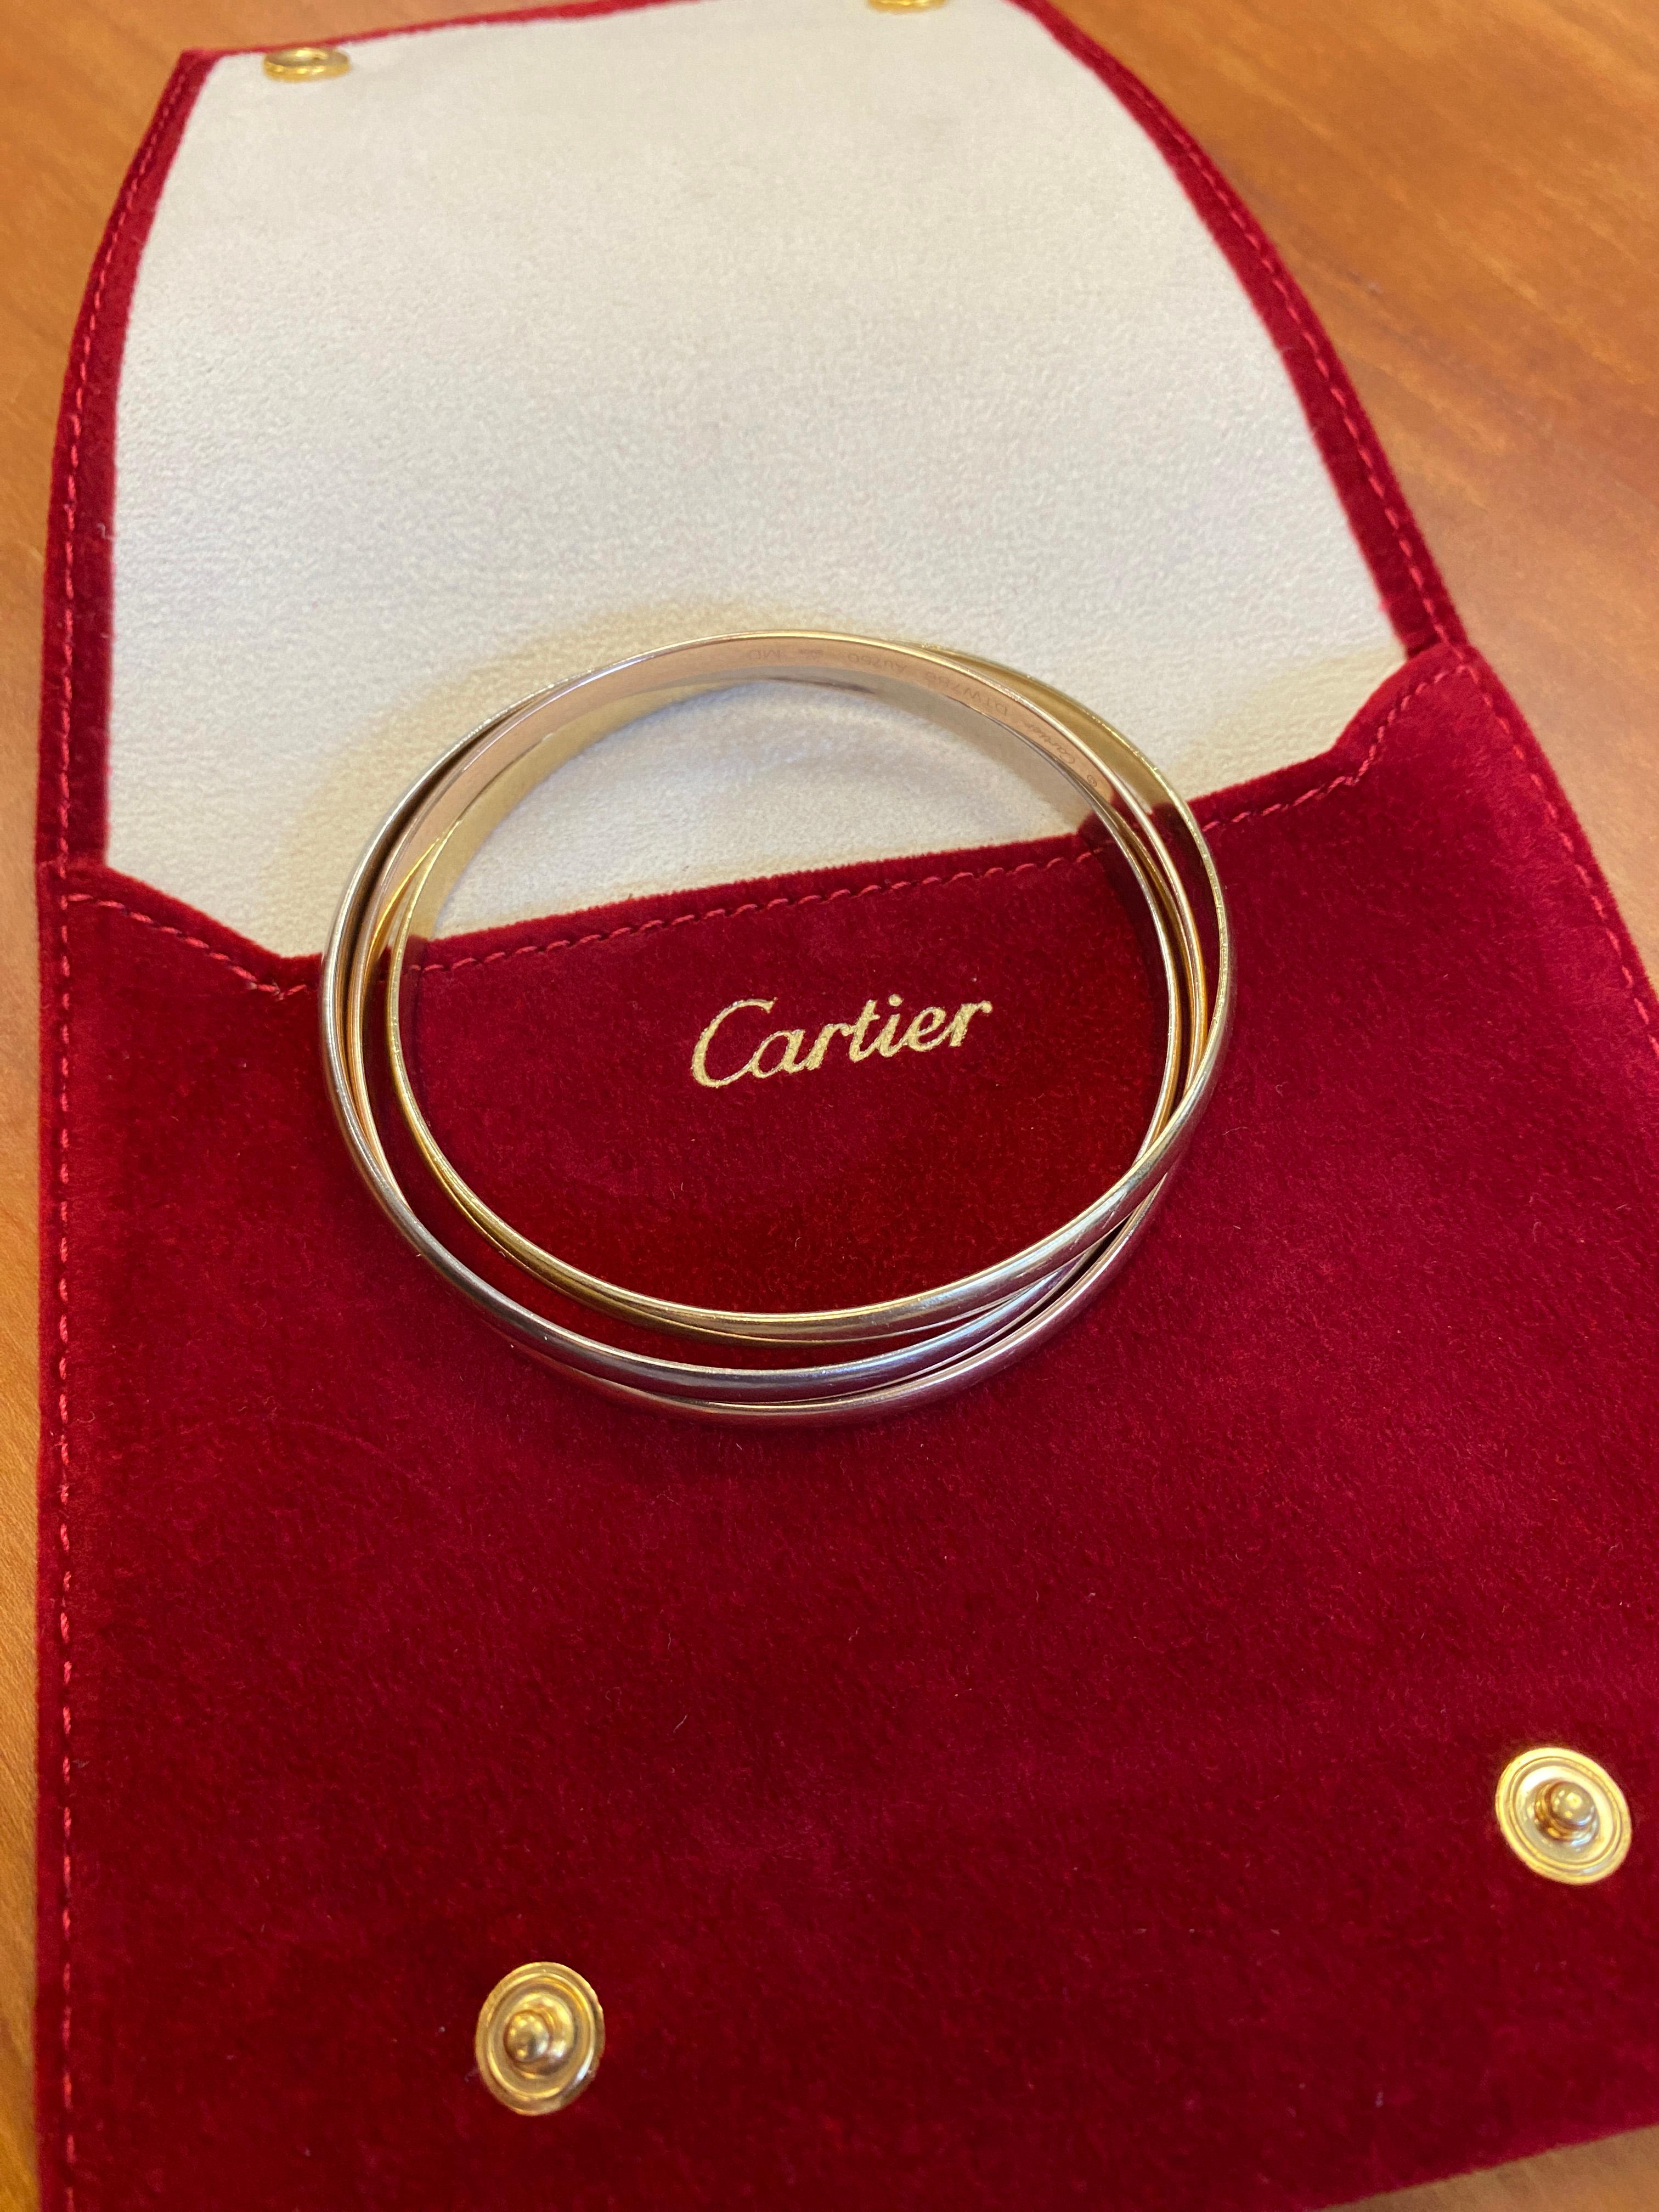 The iconic Cartier Trinity Bracelet is a timeless masterpiece that beautifully combines elegance and symbolism. The Trinity collection was conceived in 1924 and features three intertwined bands, each made from a different color gold, symbolizing